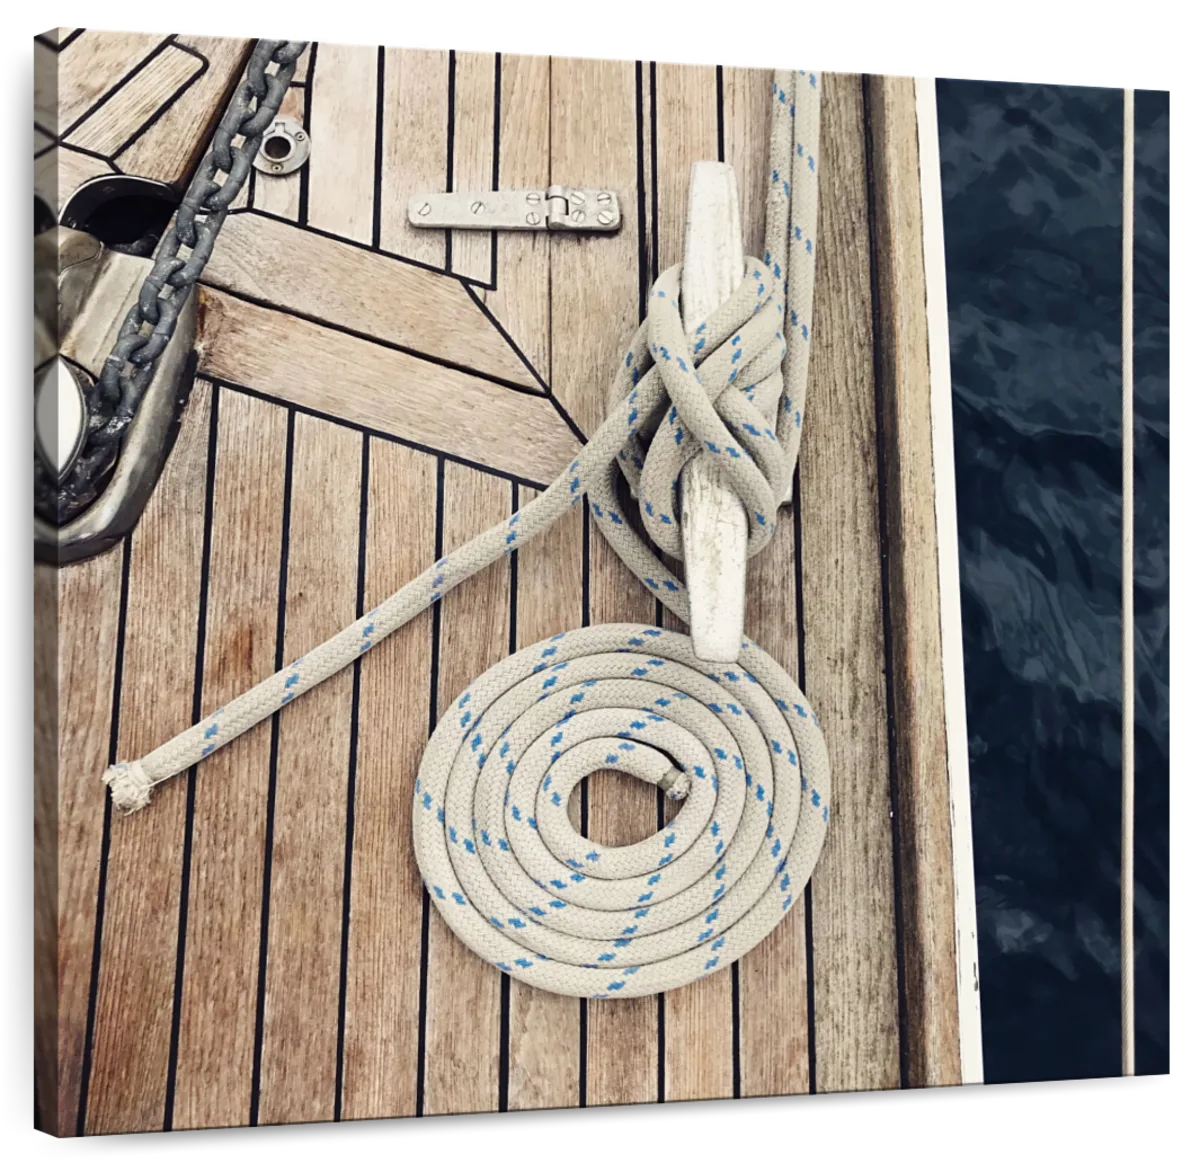 https://cdn.shopify.com/s/files/1/1568/8443/products/zvt_es_kdf_layout_1_square_boat-rope-cleat-wall-art.webp?v=1668766624